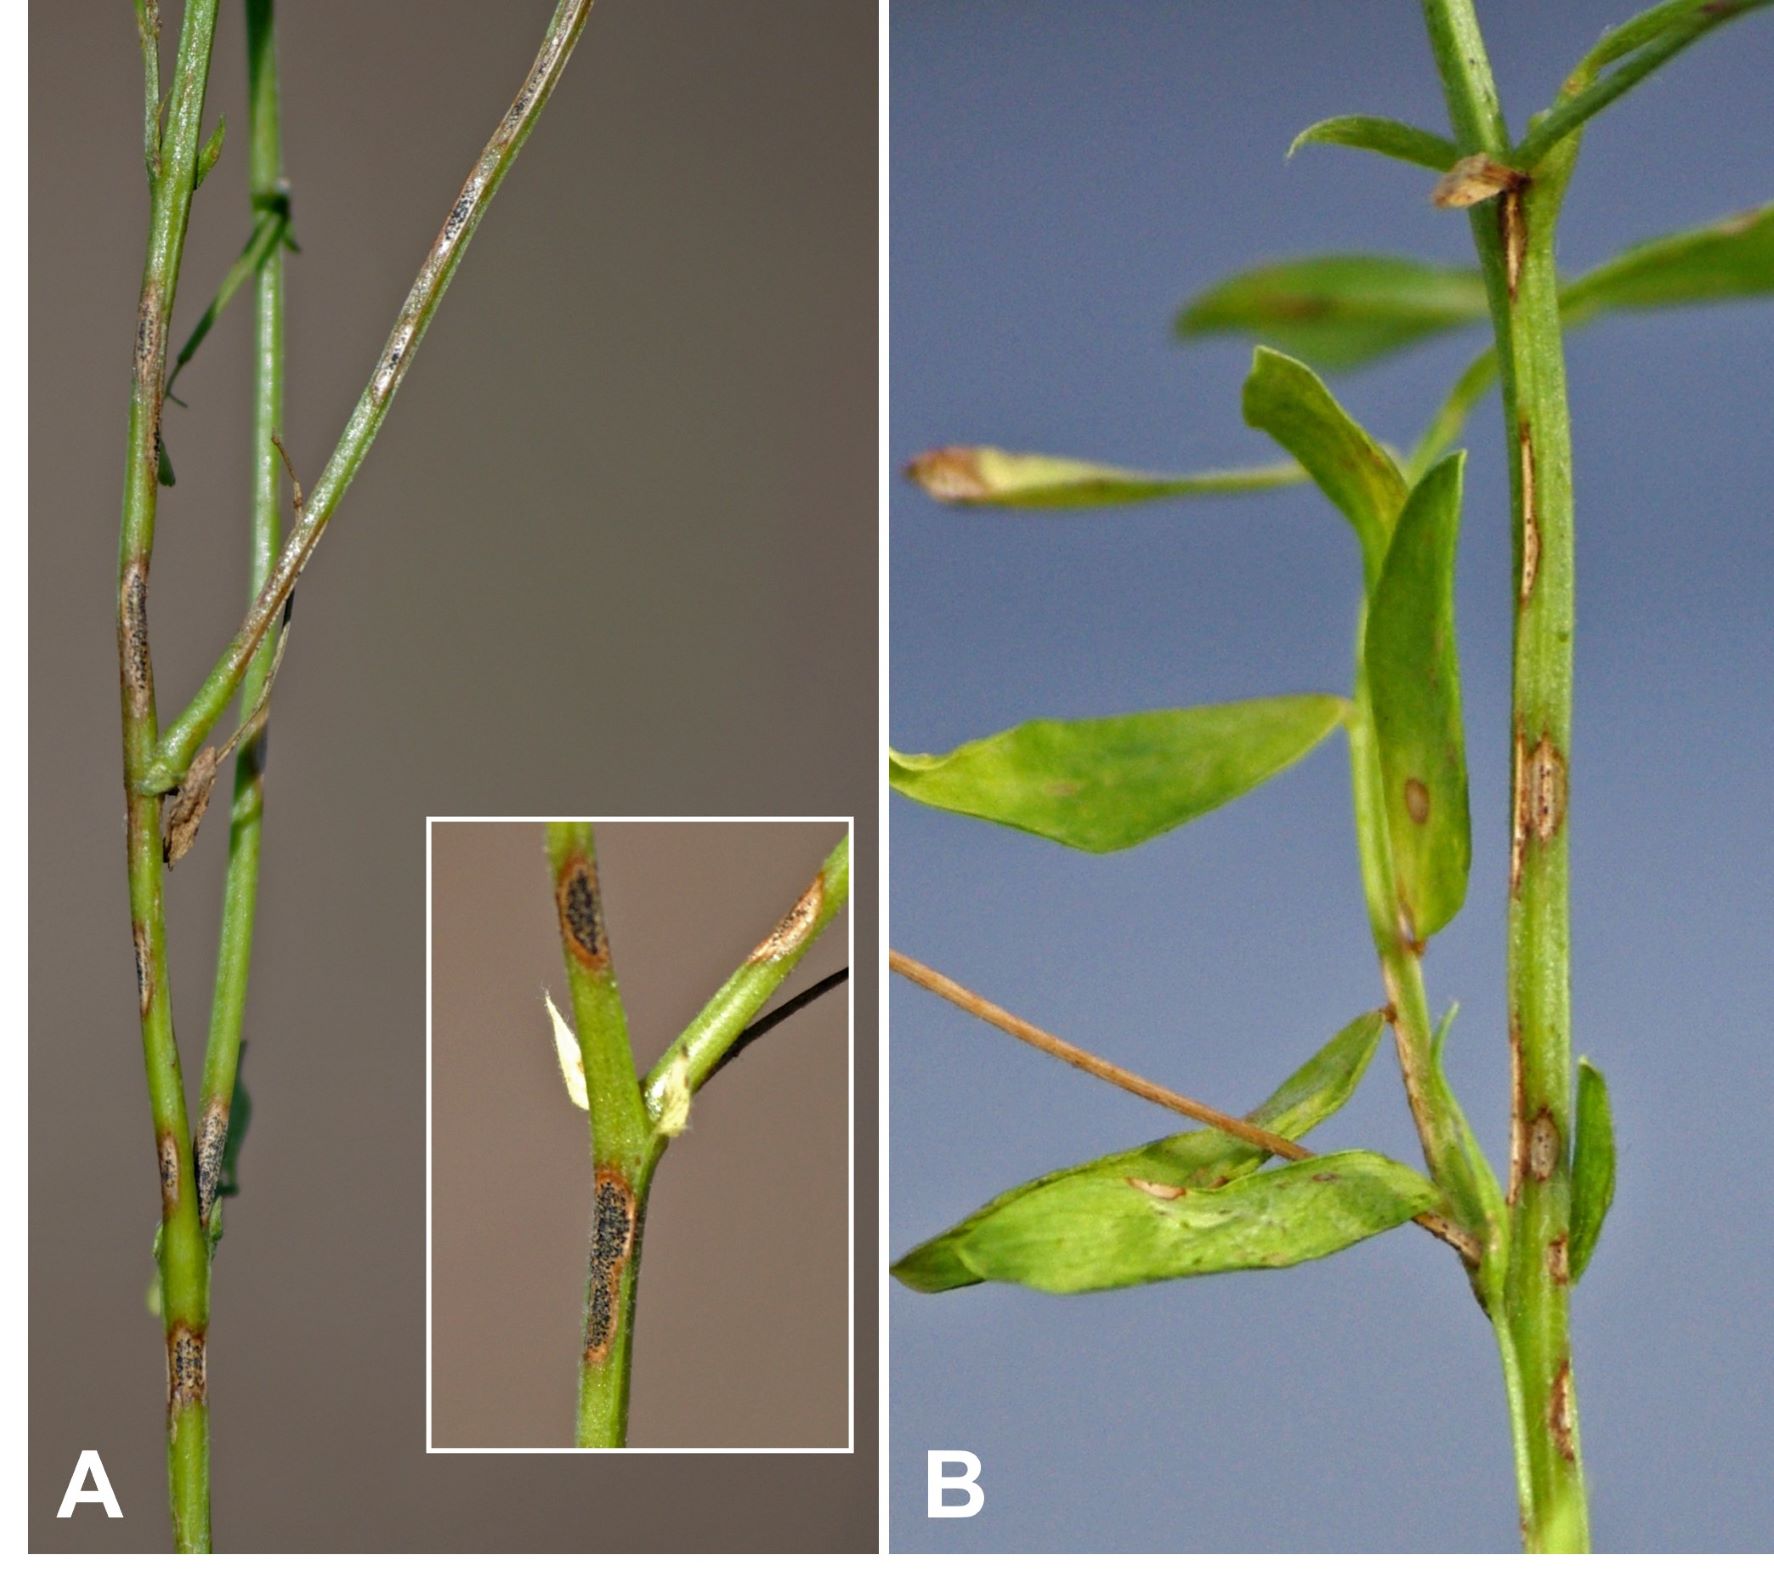 Black fruiting structures and microsclerotia from Anthracnose on lentil stem, compared to Ascochyta blight which appears similarly